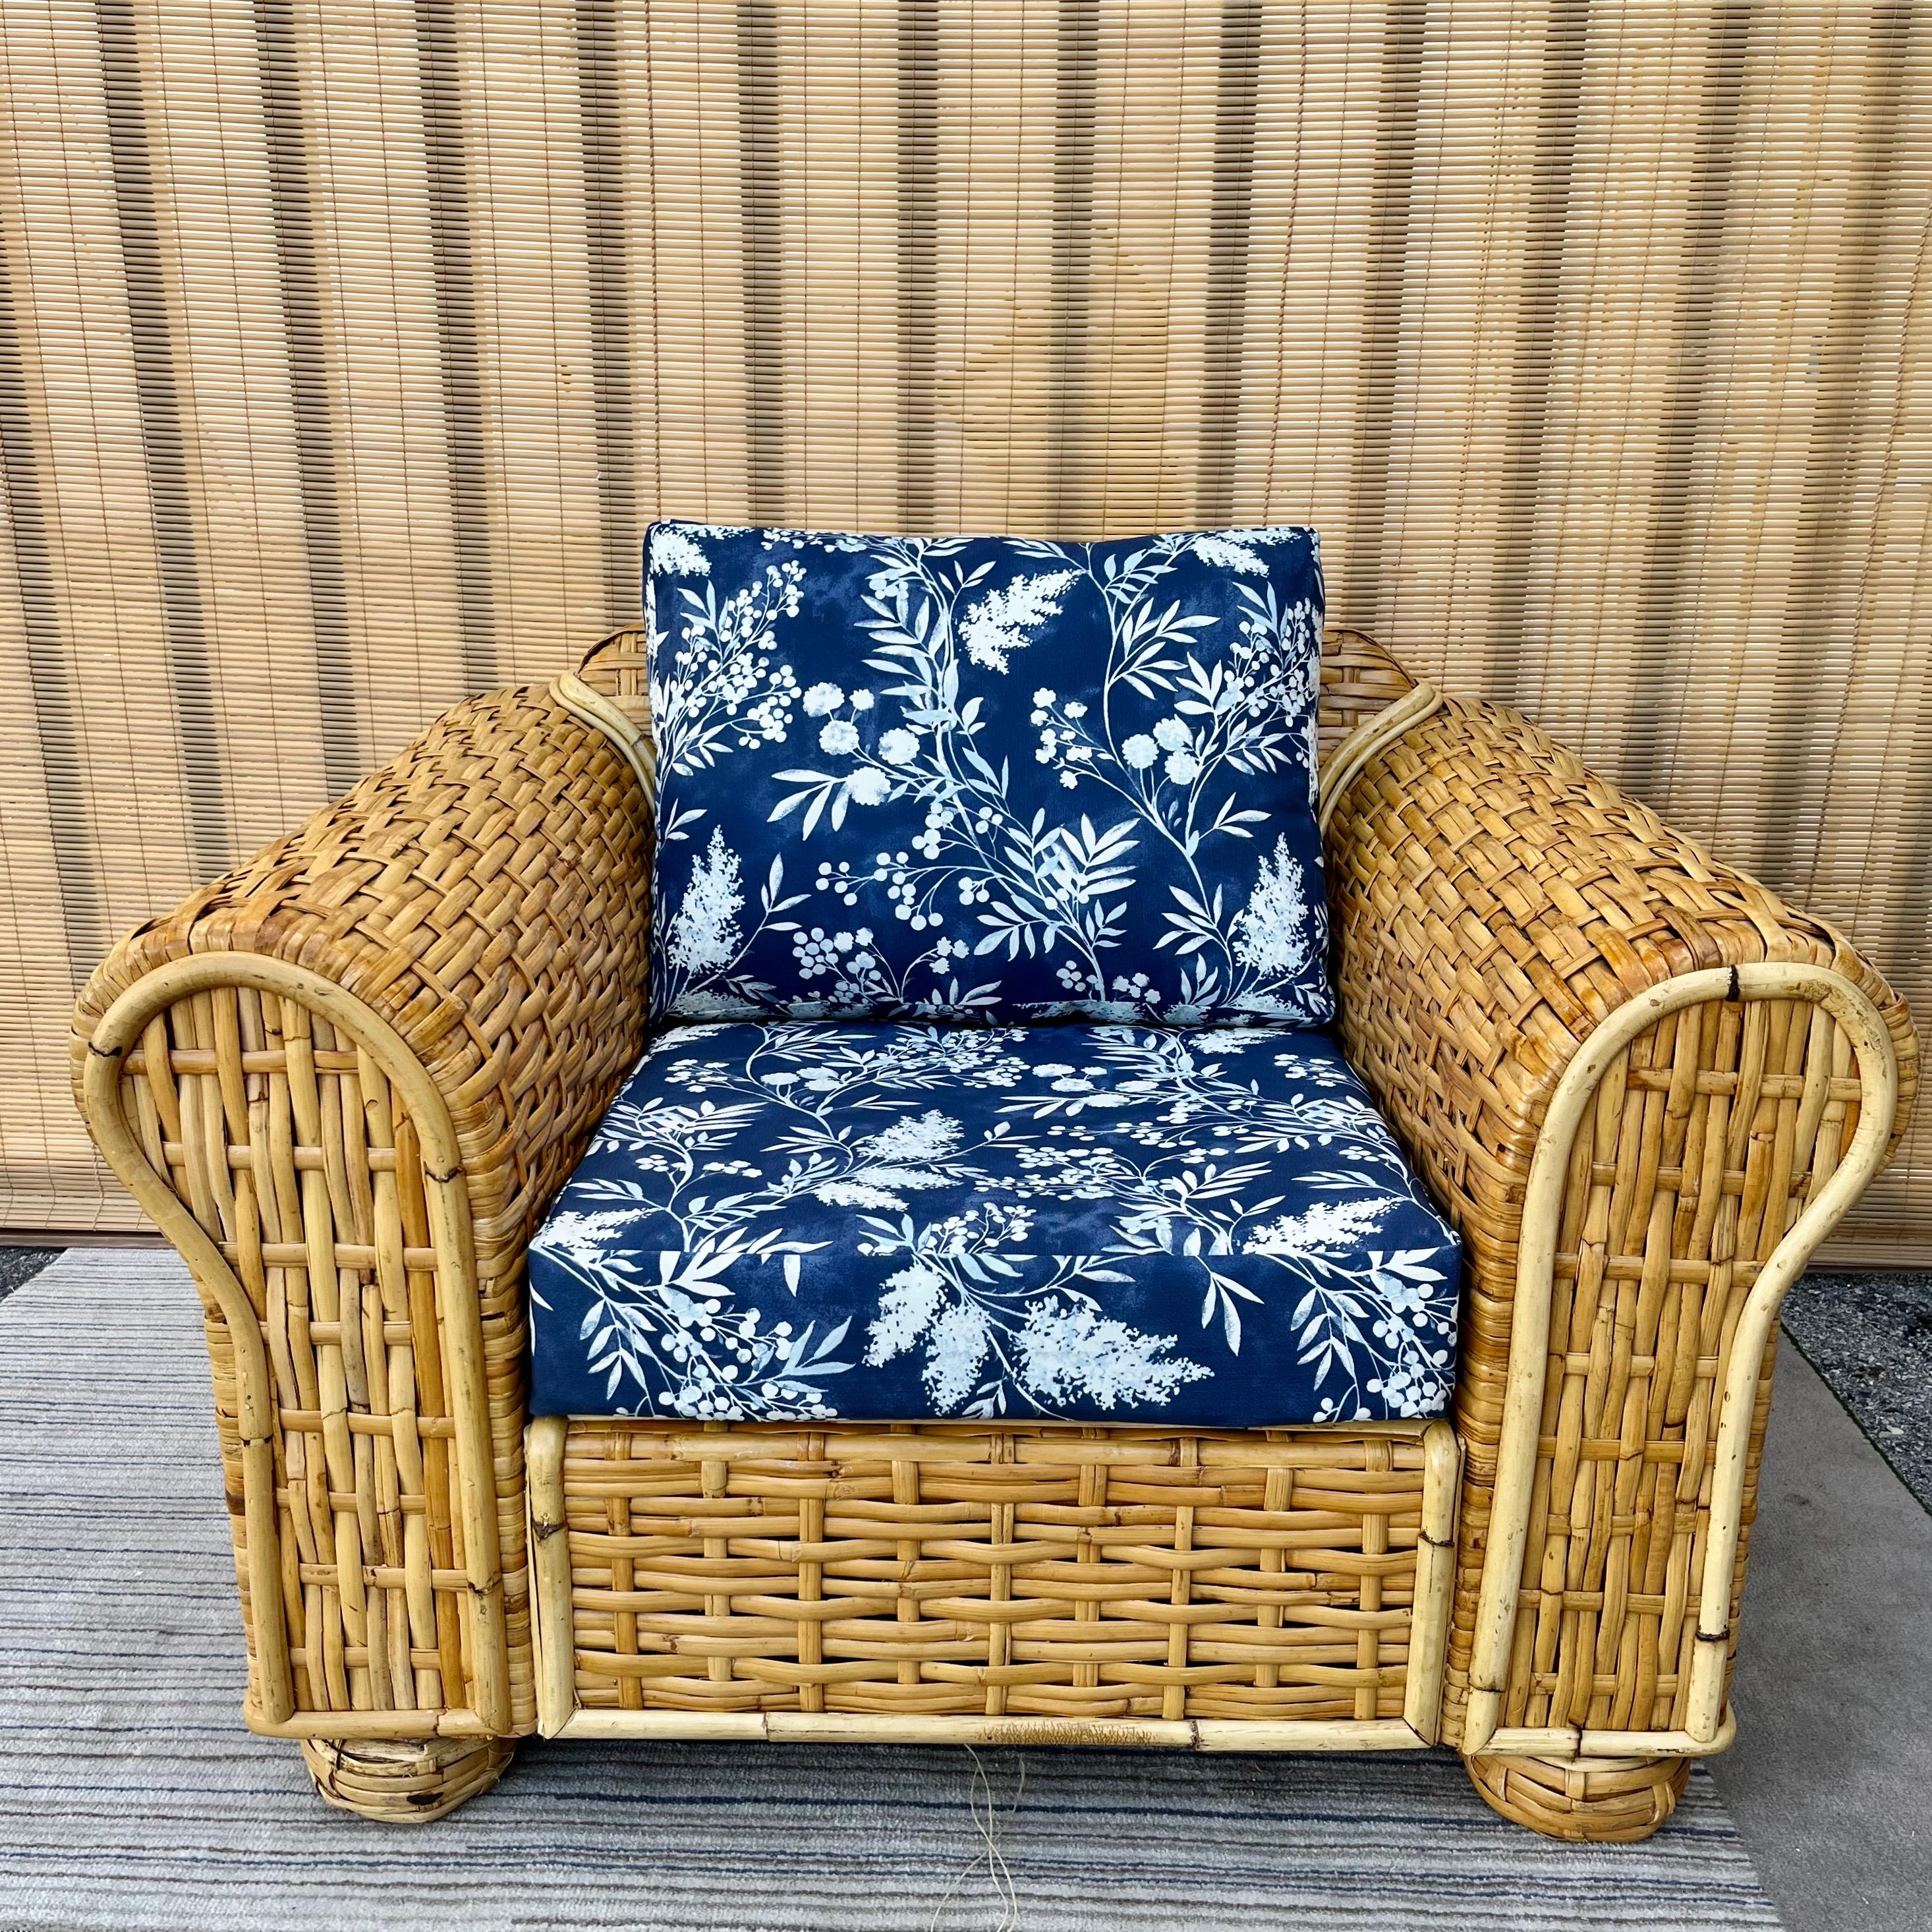 Hollywood Regency Late 20th Century Ralph Lauren Coastal Style Woven Rattan Lounge Chair For Sale